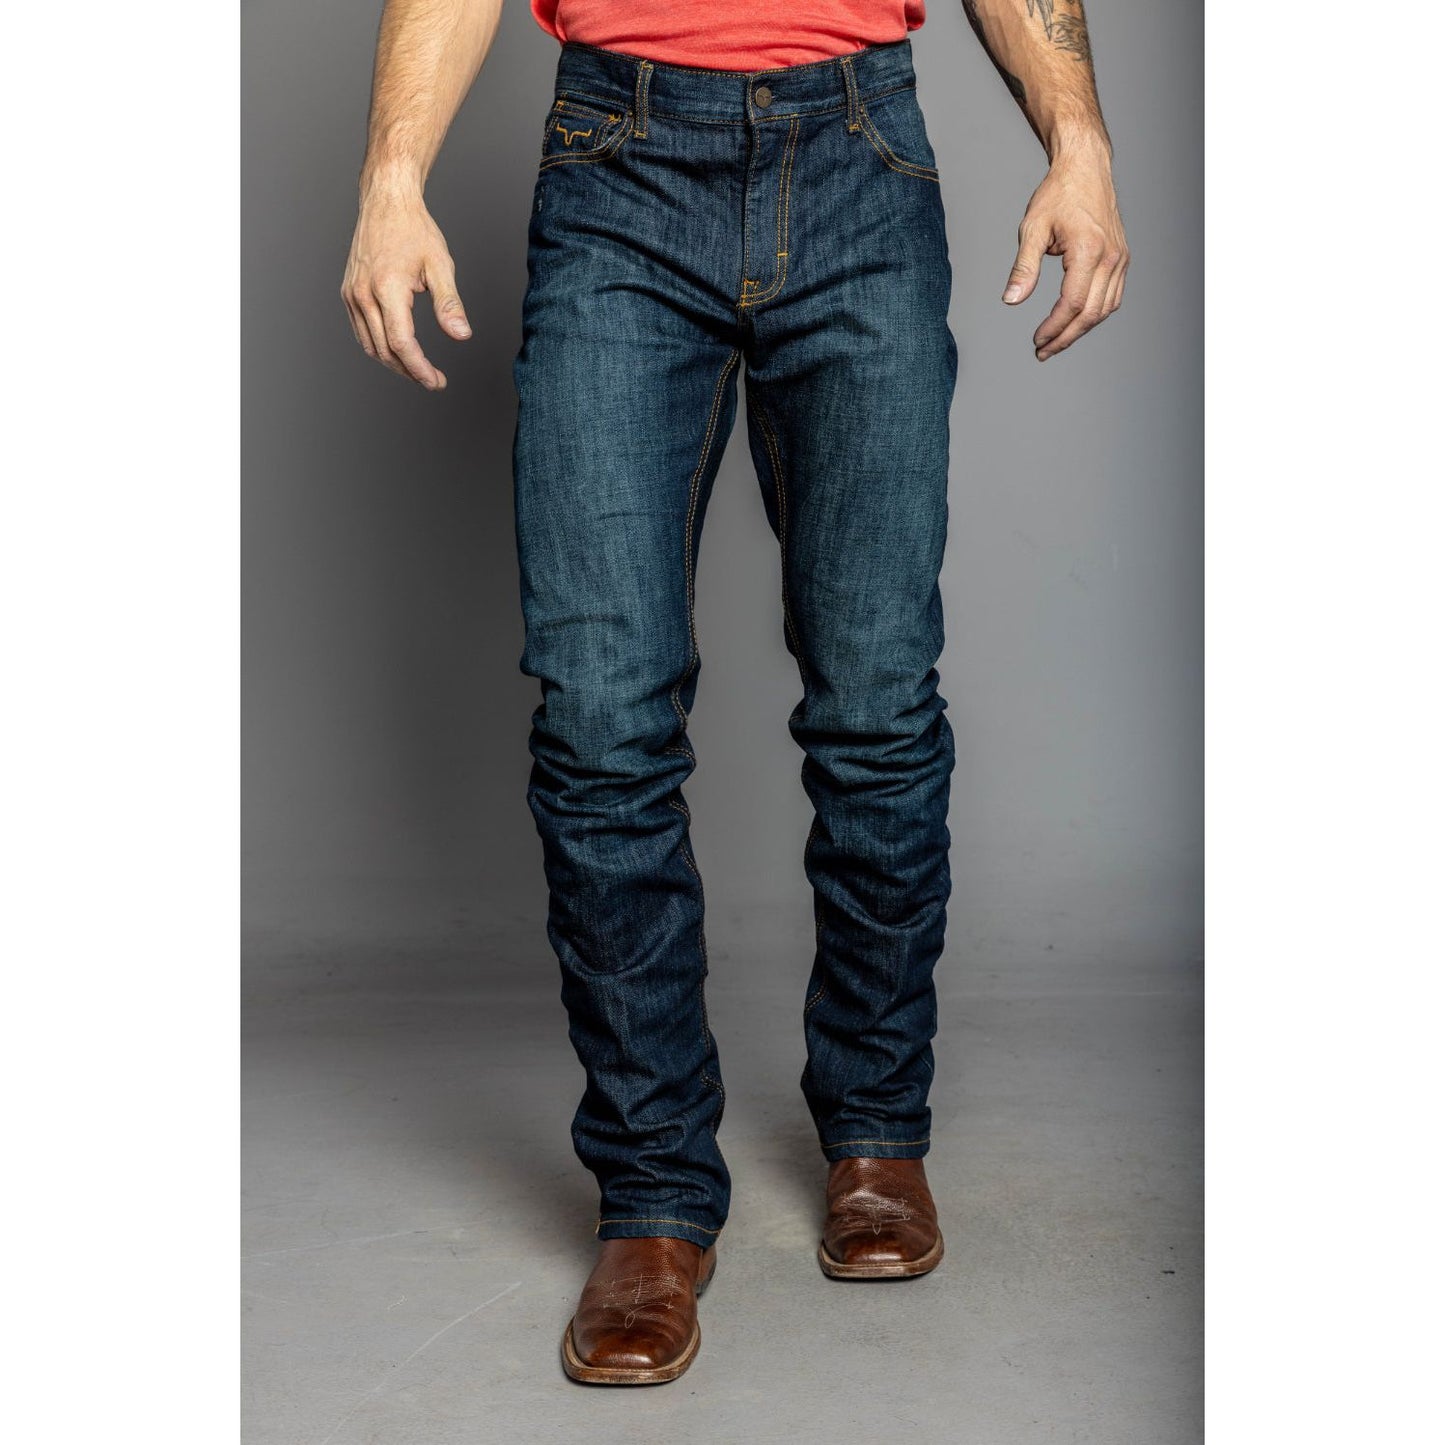 Kimes Ranch Mens Roger Jeans